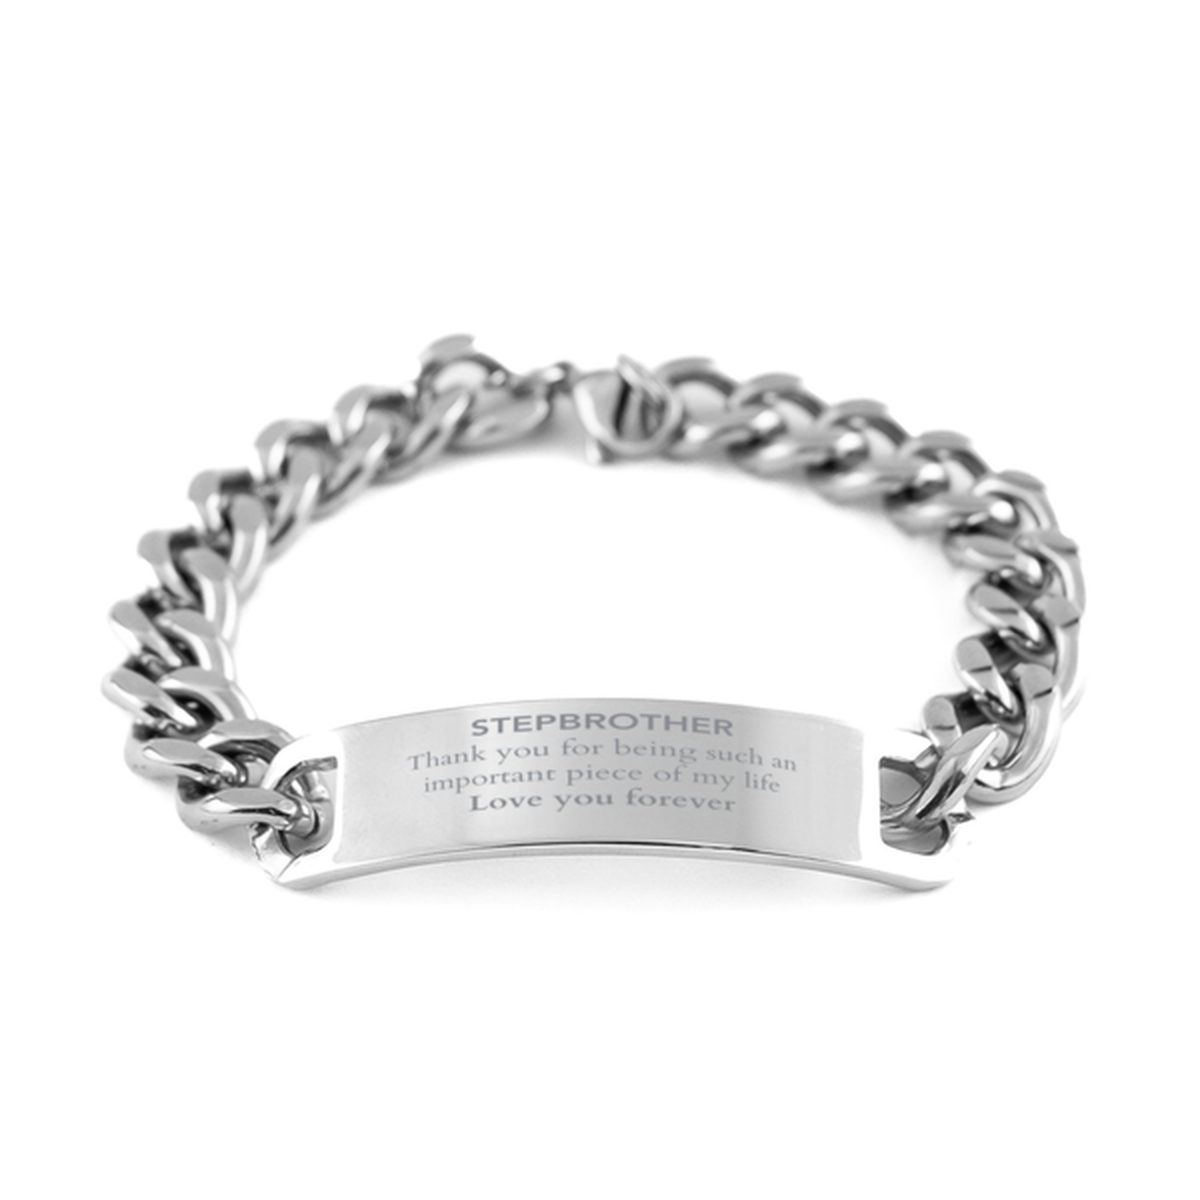 Appropriate Stepbrother Cuban Chain Stainless Steel Bracelet Epic Birthday Gifts for Stepbrother Thank you for being such an important piece of my life Stepbrother Christmas Mothers Fathers Day